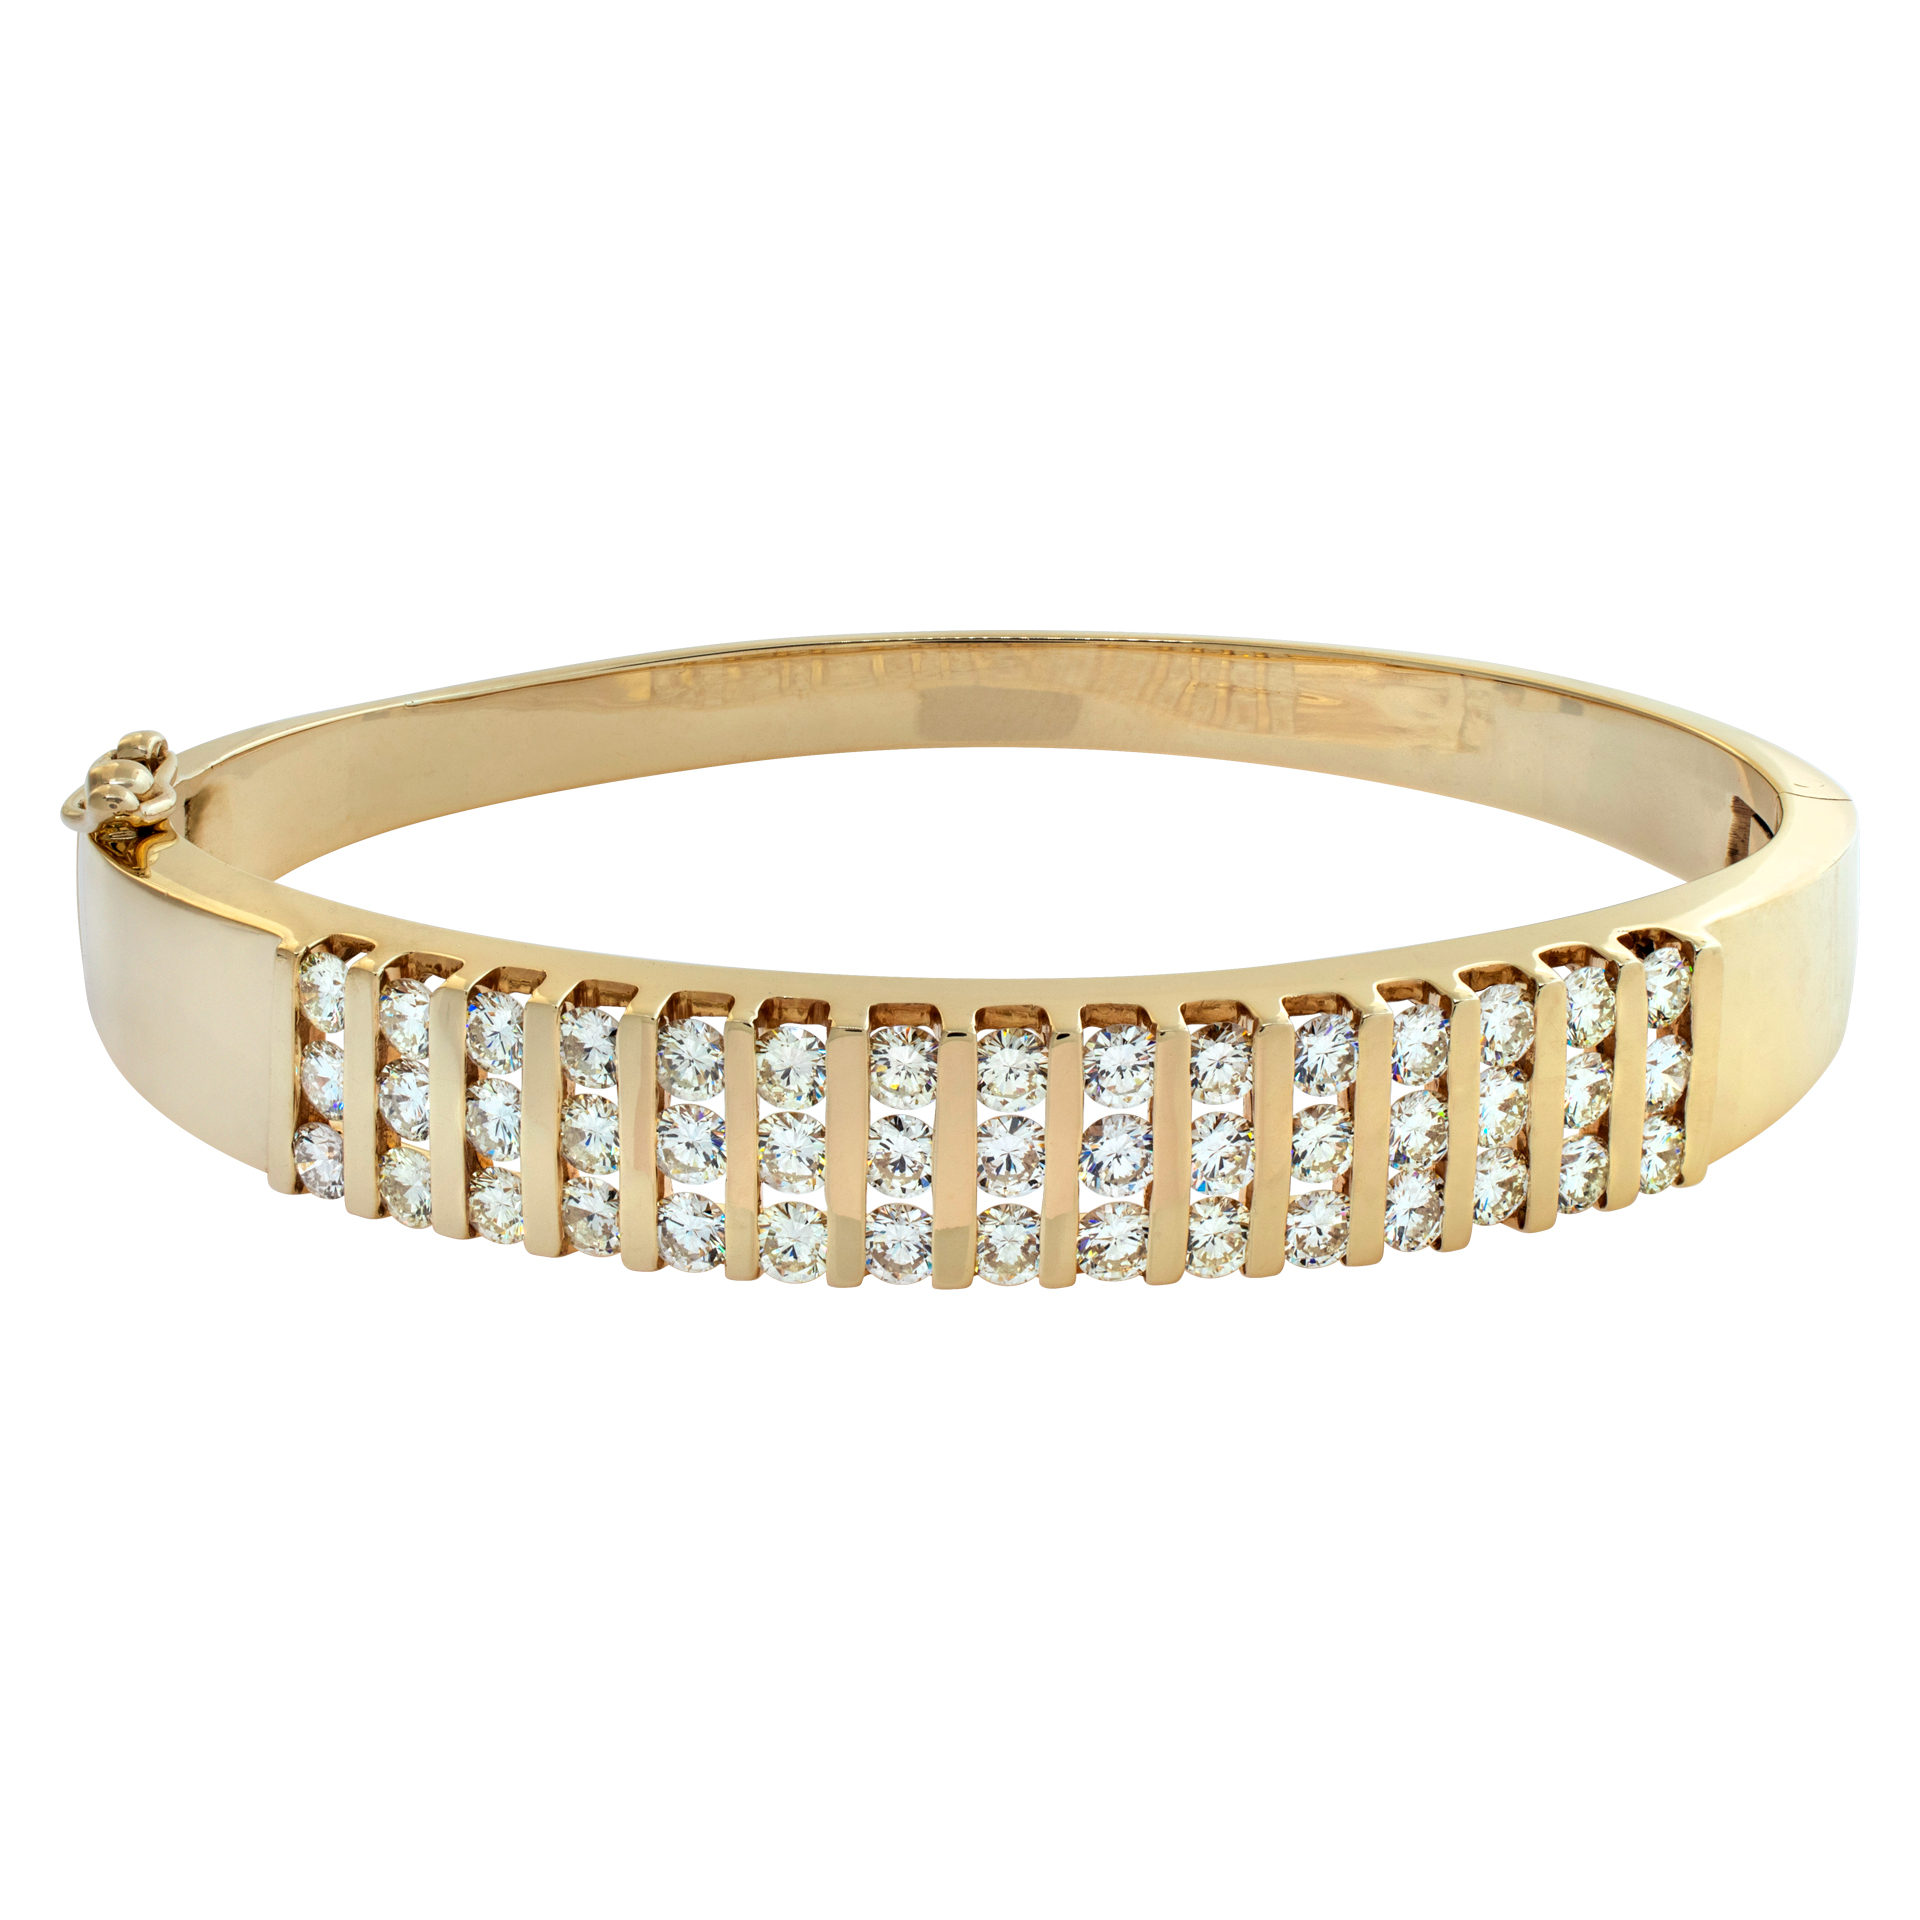 Round brilliant cut channel set bangle bracelet in 14k yellow gold. Round brilliant cut diamonds total approx. weight: 2.50 carats